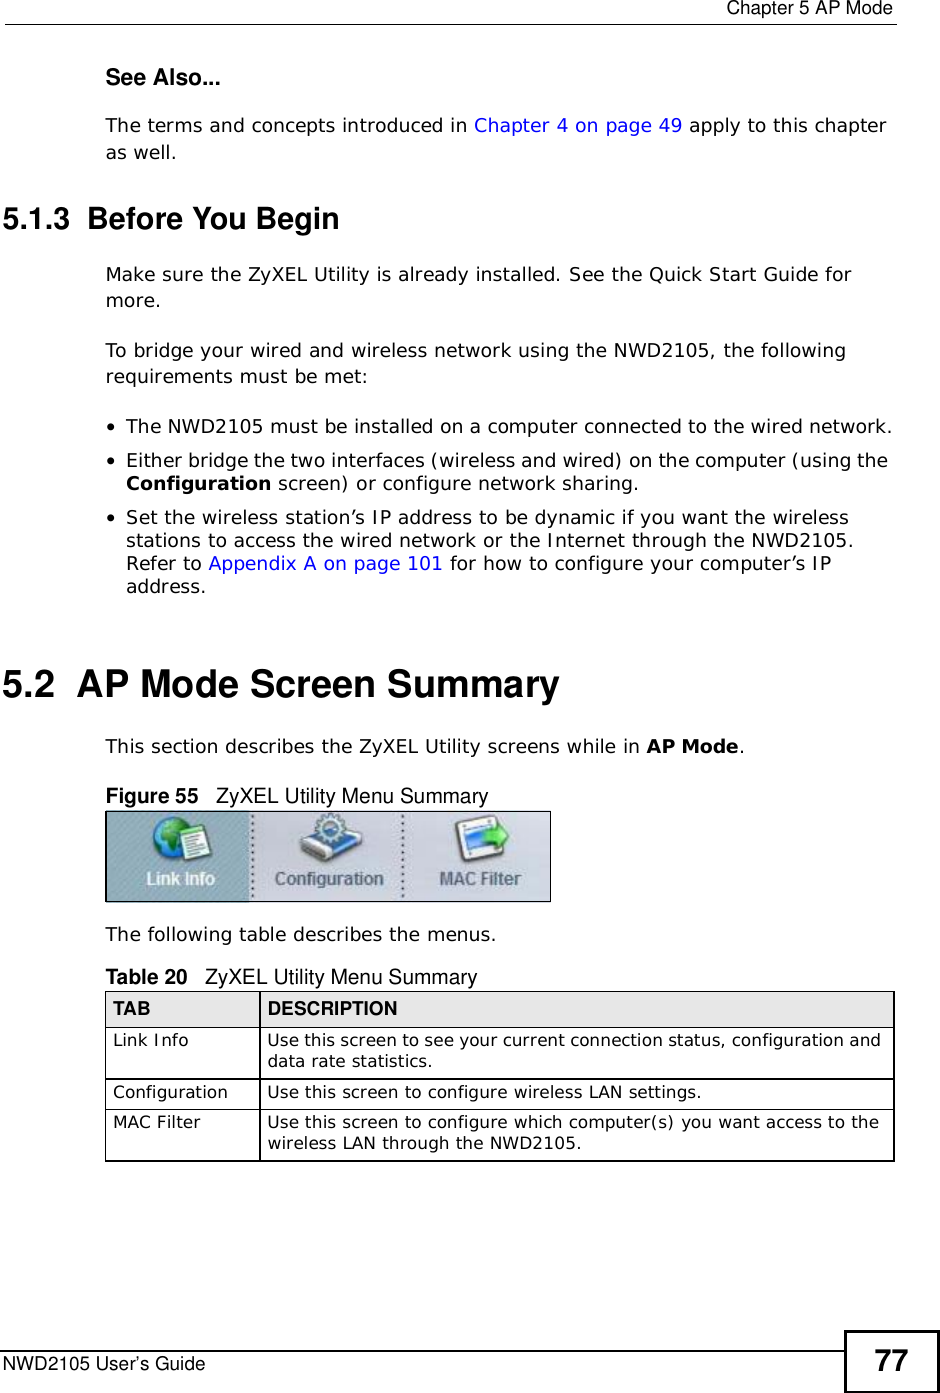  Chapter 5AP ModeNWD2105 User’s Guide 77See Also...The terms and concepts introduced in Chapter 4 on page 49 apply to this chapter as well.5.1.3  Before You BeginMake sure the ZyXEL Utility is already installed. See the Quick Start Guide for more.To bridge your wired and wireless network using the NWD2105, the following requirements must be met:•The NWD2105 must be installed on a computer connected to the wired network.•Either bridge the two interfaces (wireless and wired) on the computer (using the Configuration screen) or configure network sharing.•Set the wireless station’s IP address to be dynamic if you want the wireless stations to access the wired network or the Internet through the NWD2105. Refer to Appendix A on page 101 for how to configure your computer’s IP address.5.2  AP Mode Screen Summary This section describes the ZyXEL Utility screens while in AP Mode.Figure 55   ZyXEL Utility Menu Summary The following table describes the menus.   Table 20   ZyXEL Utility Menu SummaryTAB DESCRIPTIONLink InfoUse this screen to see your current connection status, configuration and data rate statistics.ConfigurationUse this screen to configure wireless LAN settings. MAC FilterUse this screen to configure which computer(s) you want access to the wireless LAN through the NWD2105. 